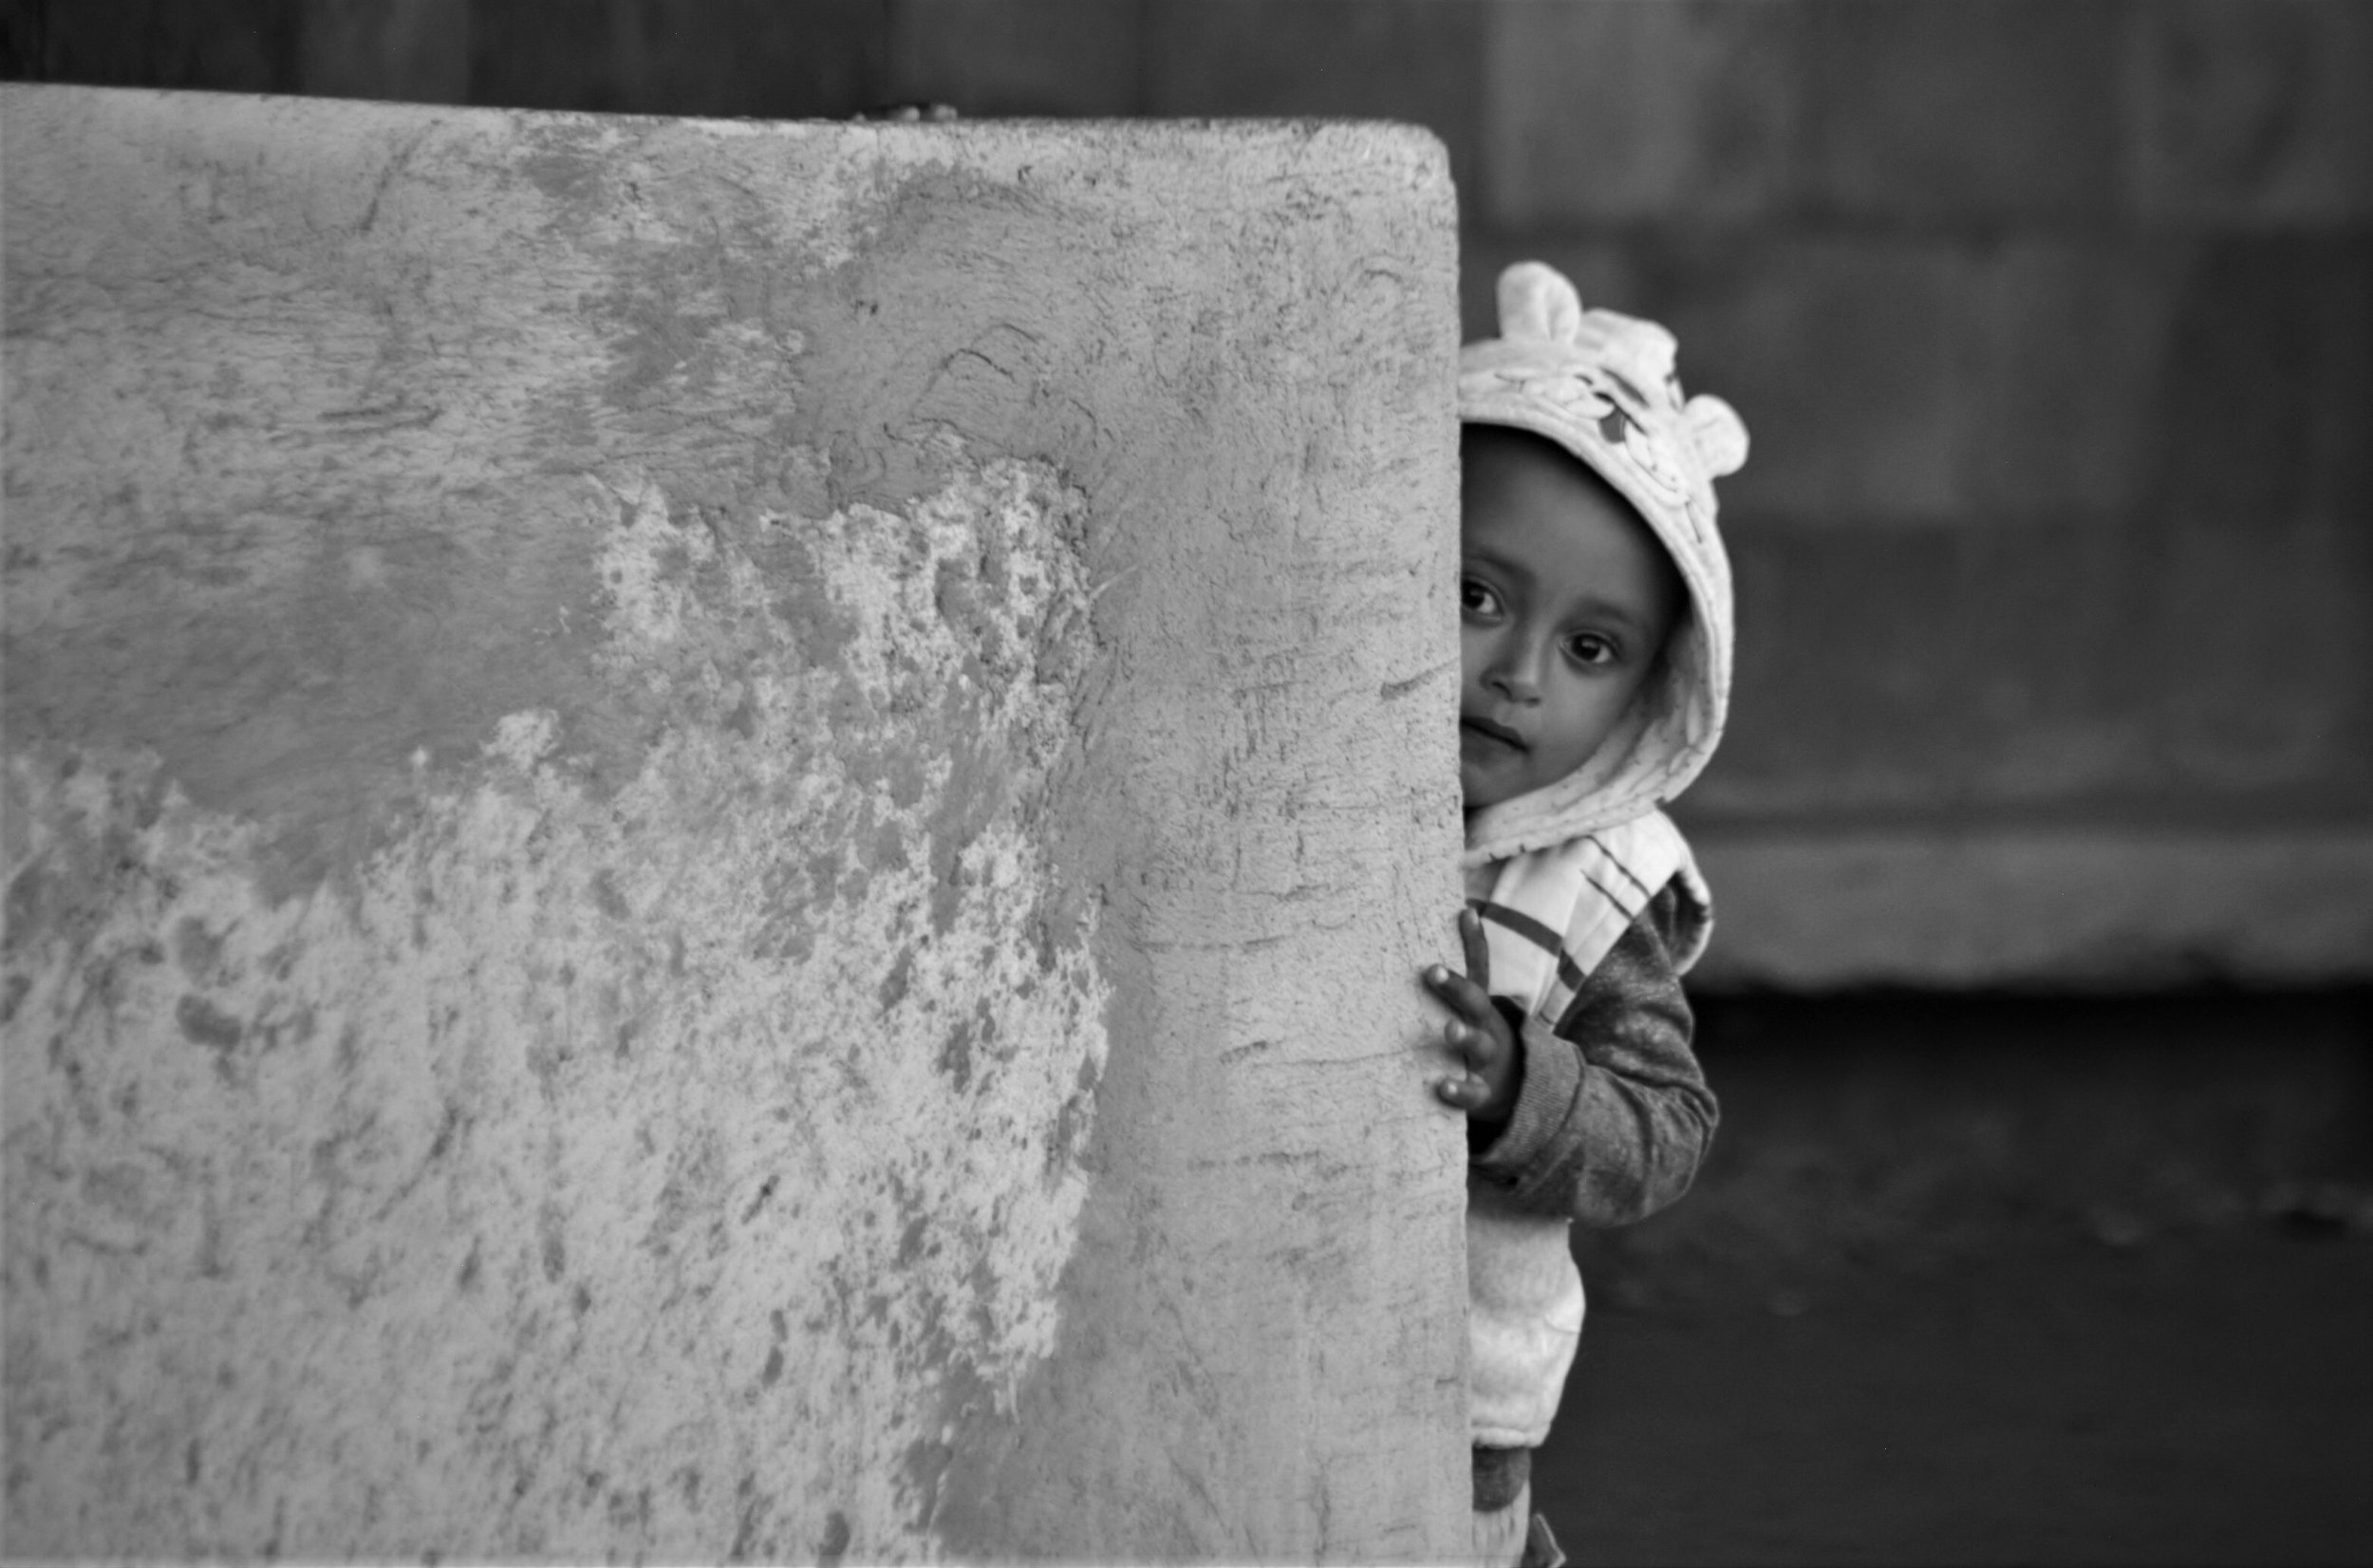 8. A young child crouches down behind a wall, eyes wide with anticipation, eagerly waiting to be found while playing hide and seek. 